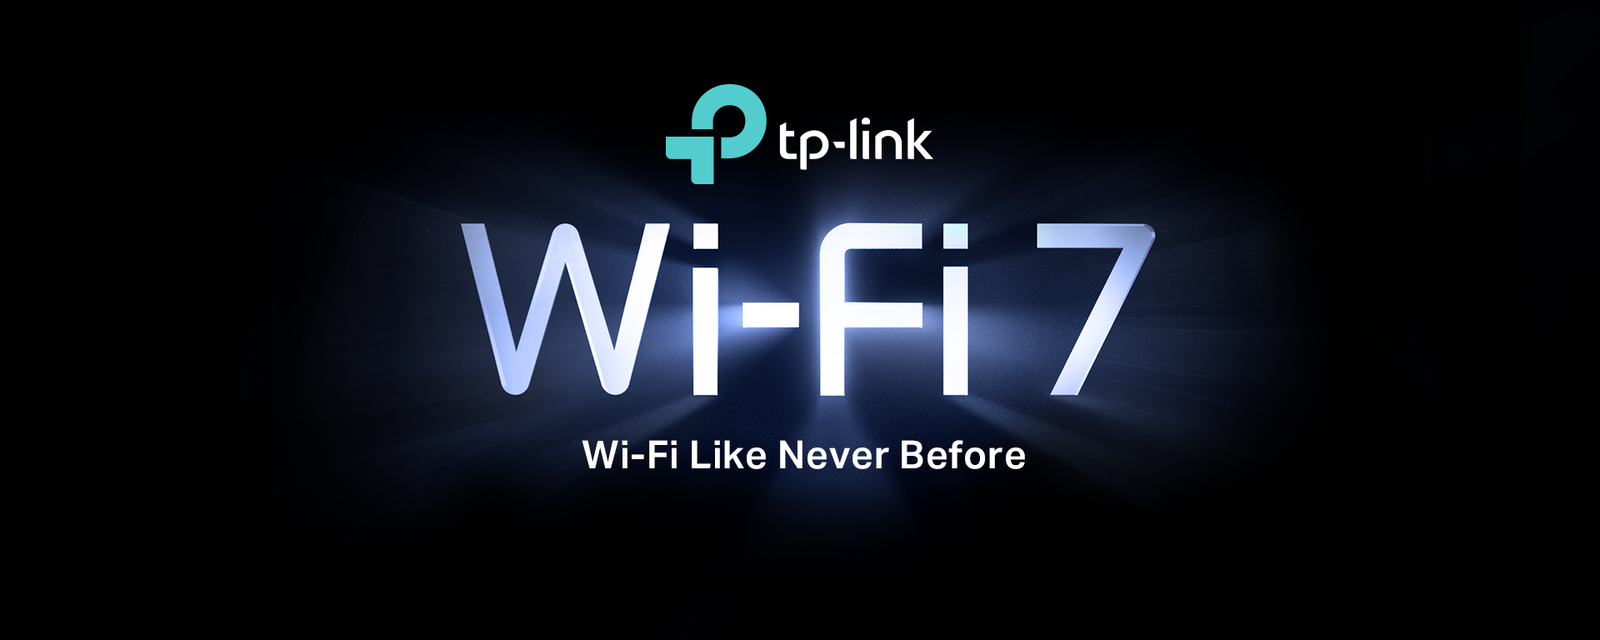 Towards a Faster Future with WiFi 7: TP-Link to Release Wi-Fi 7 Products in April!